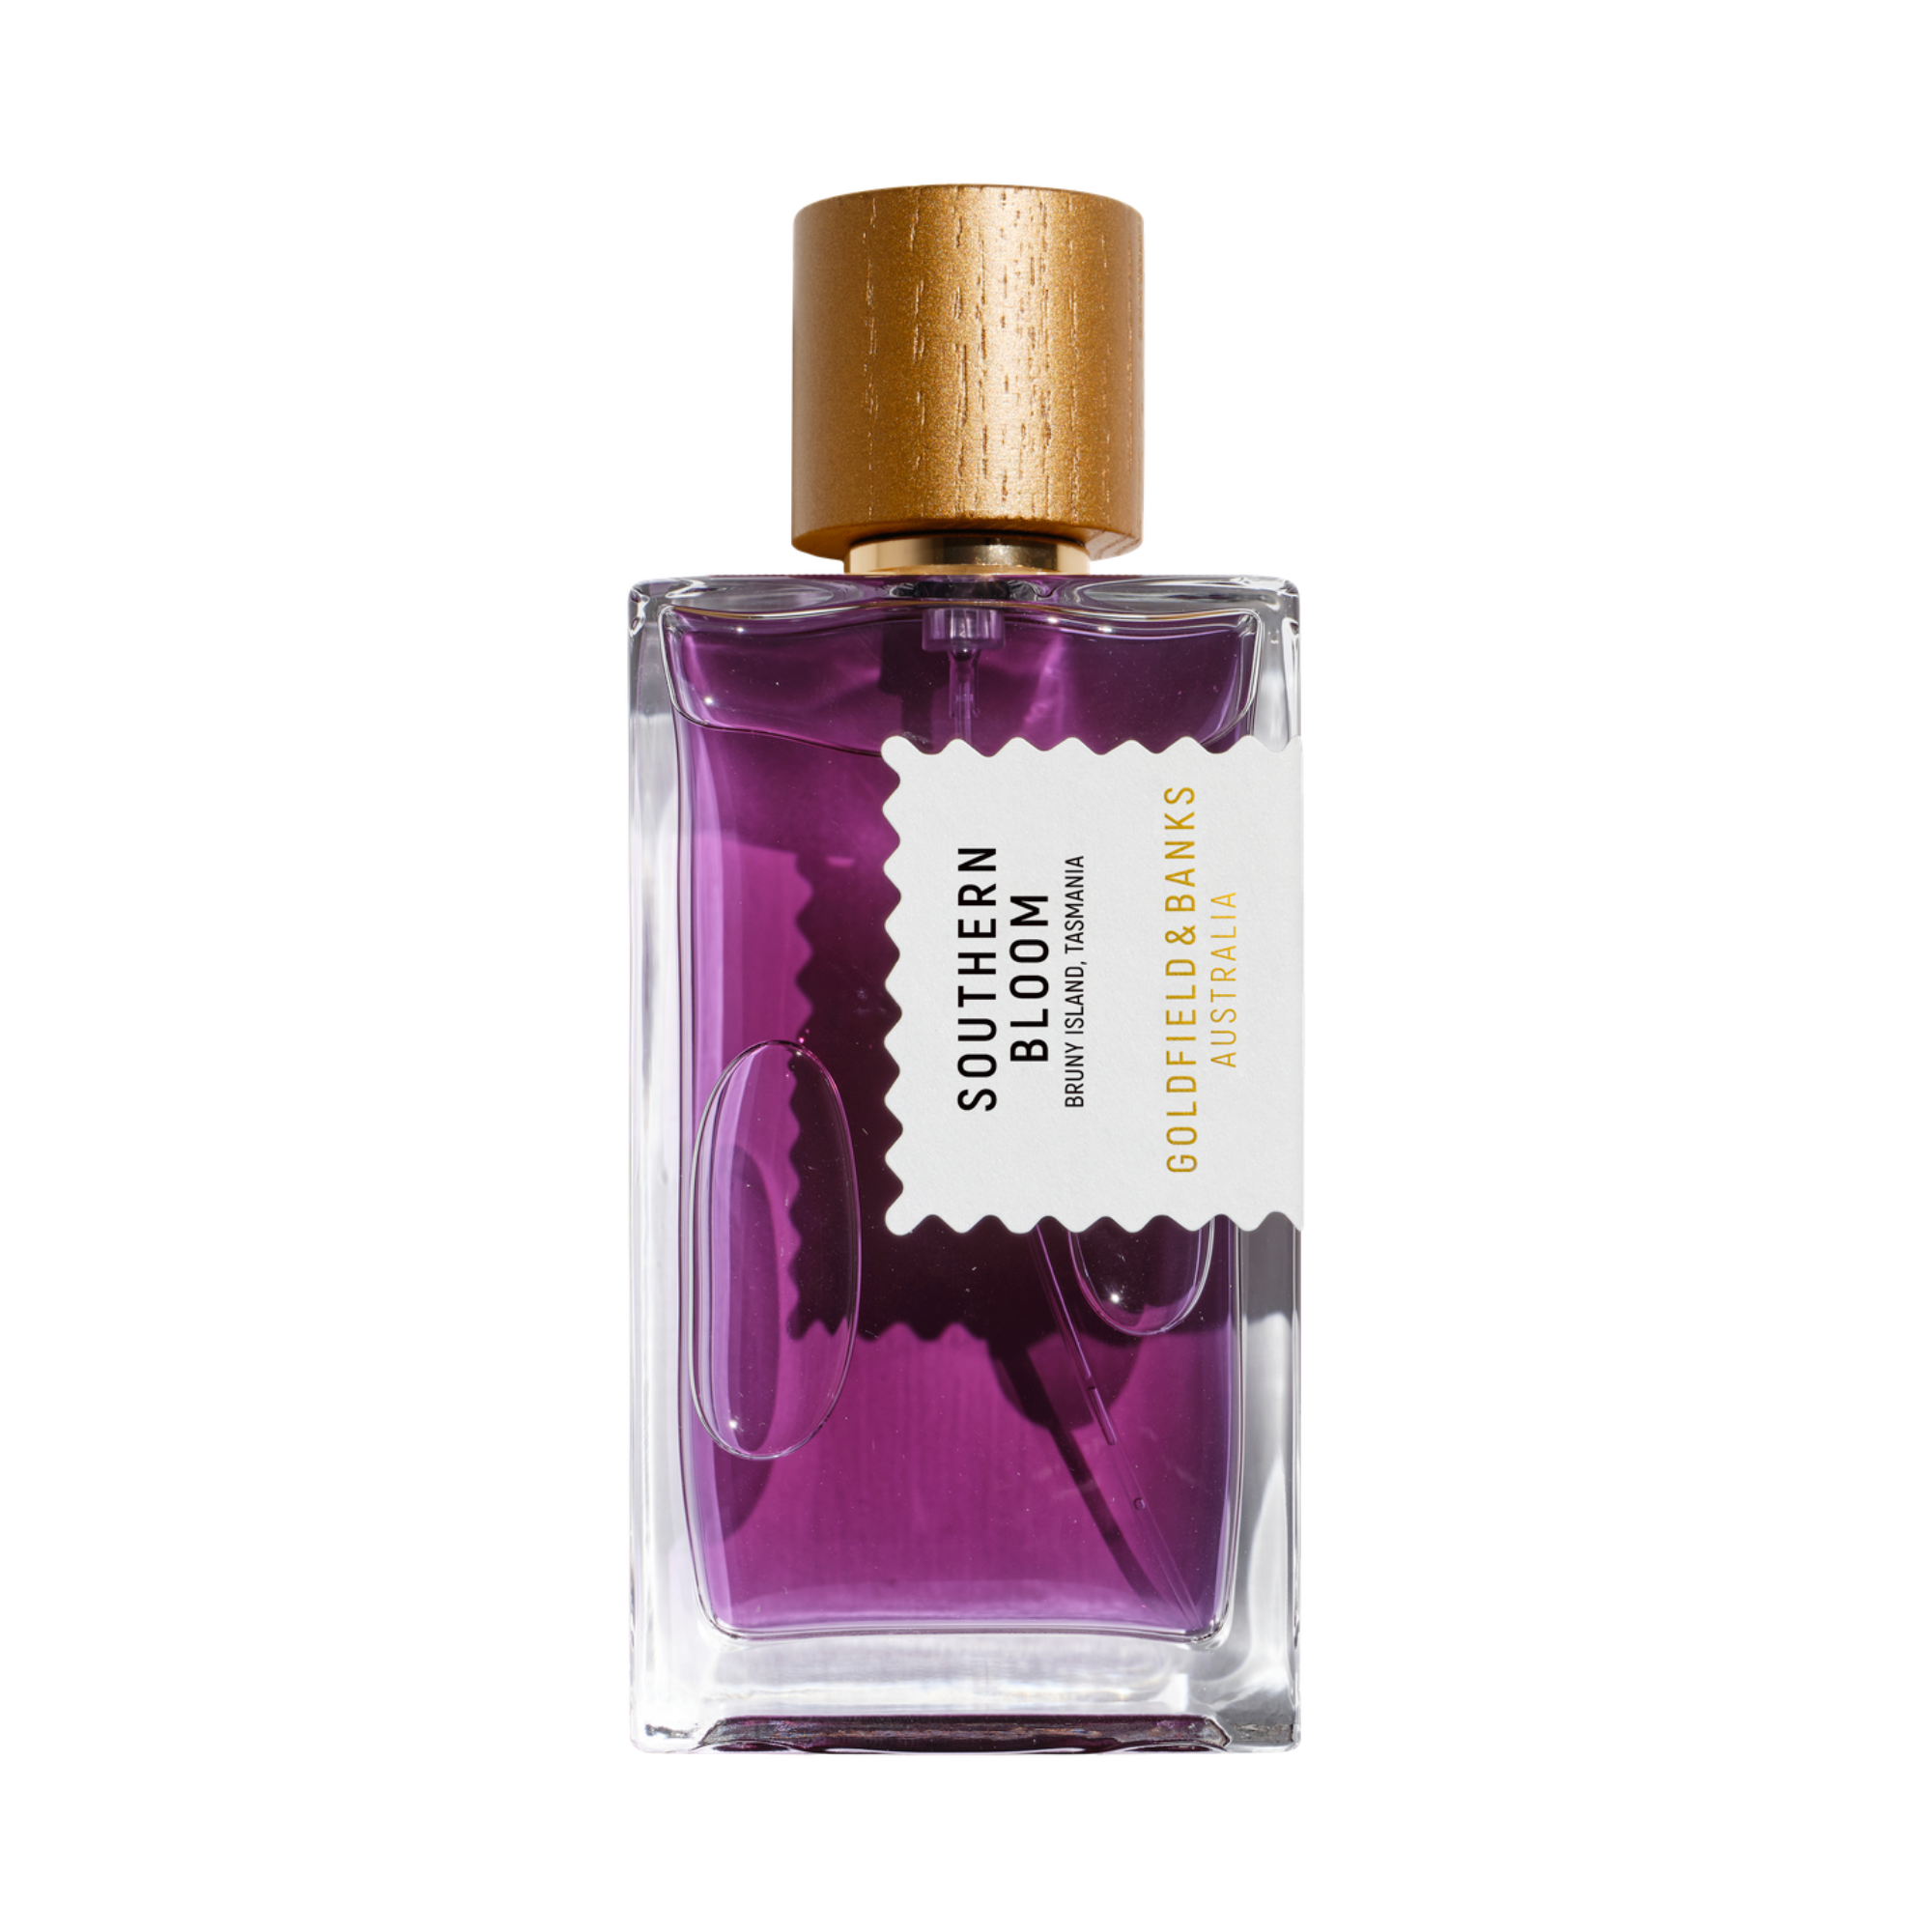 Southern Bloom Perfume Concentrate